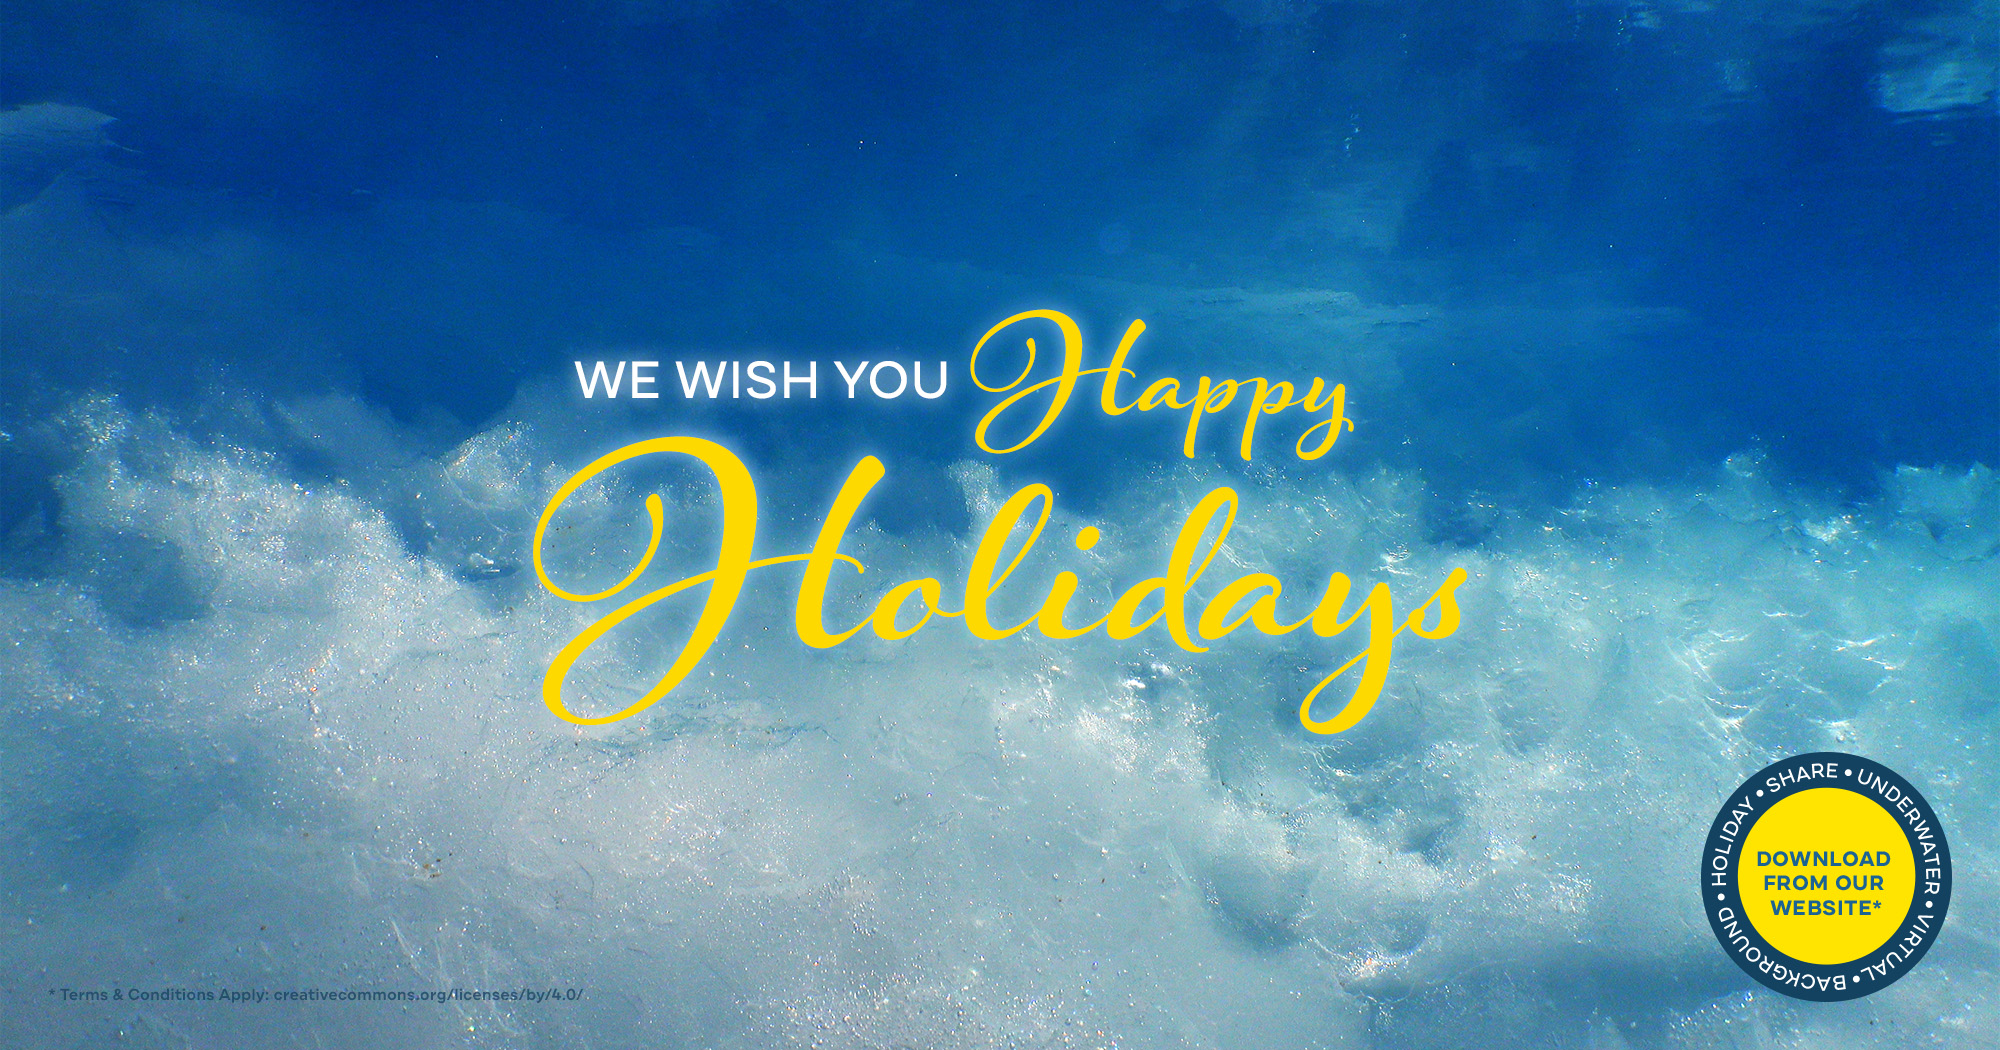 We wish you Happy Holidays! Download our digital holiday share - underwater screen backgrounds.